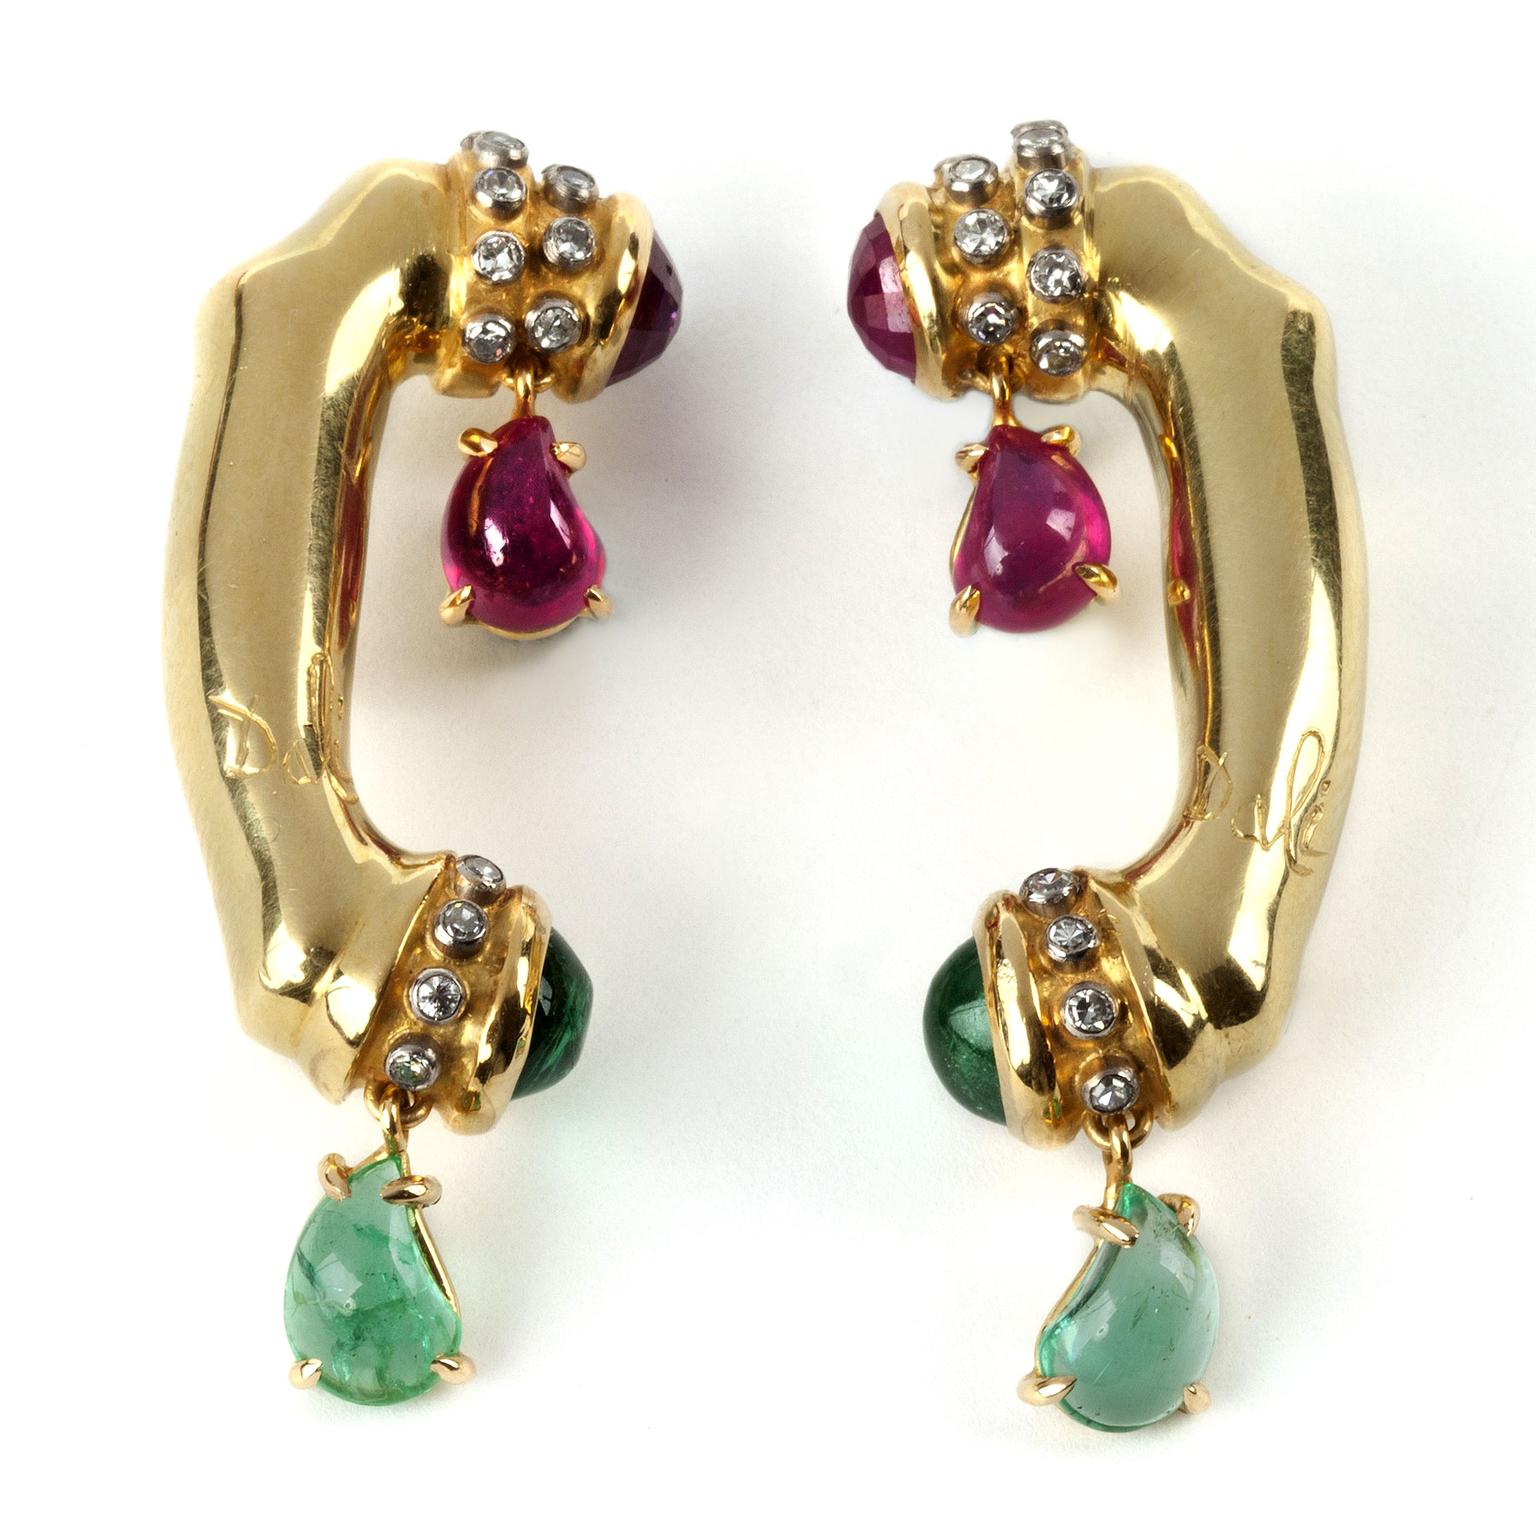 Salvador Dali melting telephone earrings for sale at Didier, seen at TEFAF 2017